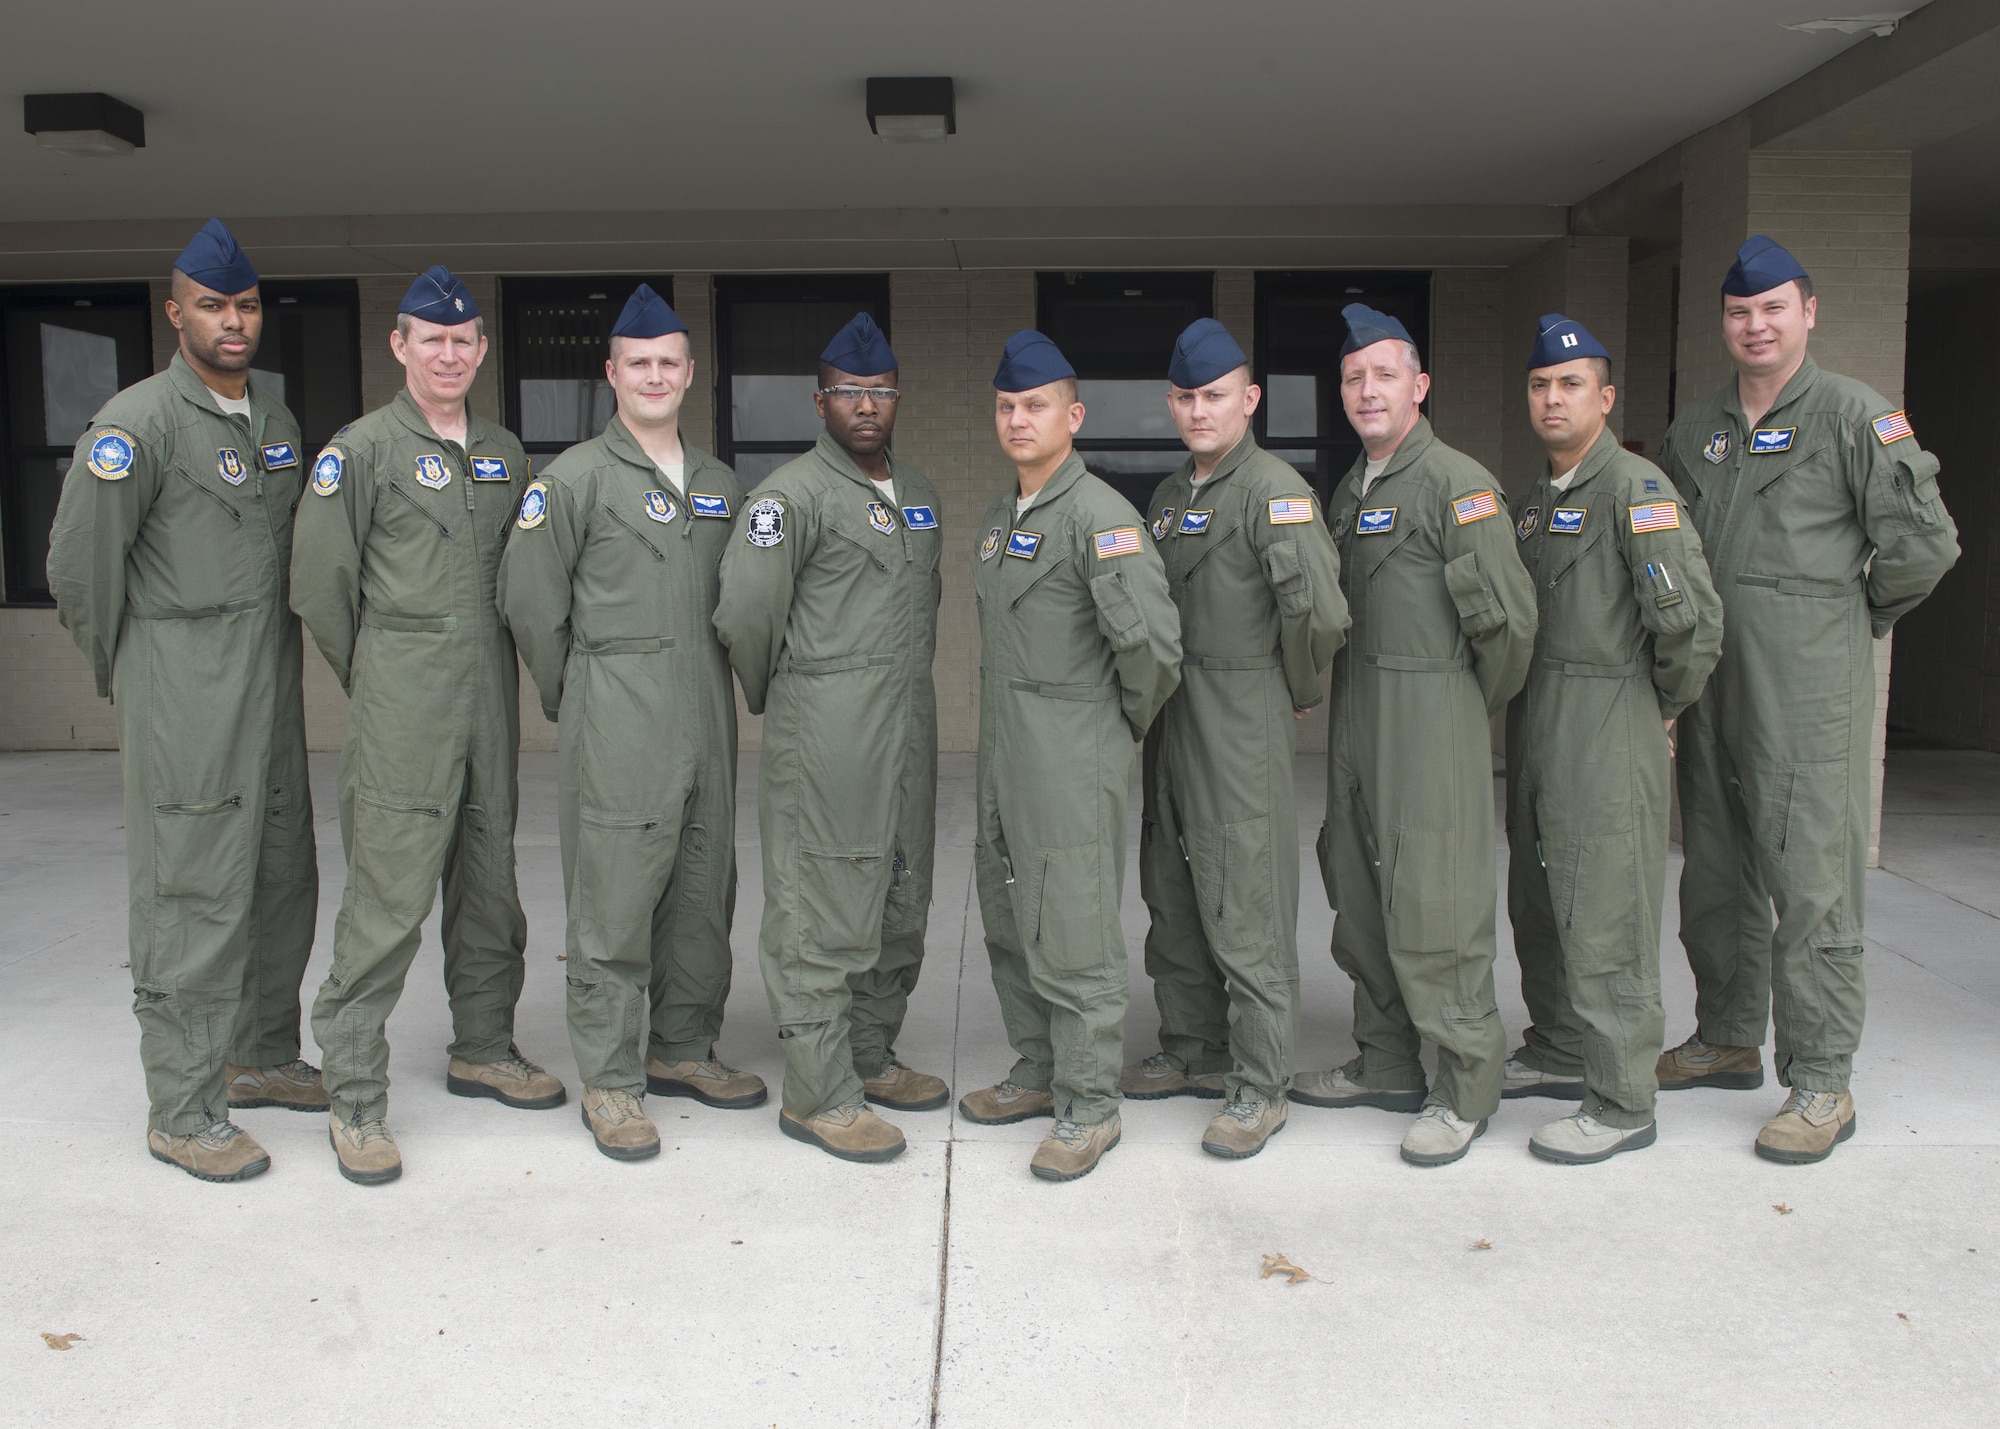 (Left to right) Senior Airman Vasean Townsend, Lt. Col. James Mann, Tech, Sgt. Brandon Jones, Tech. Sgt. Marcello Lindo, Tech. Sgt. Jason Goodsell, Tech. Sgt. Justin Walker, Master Sgt. Scott O’Brien, Capt. Francis Lessett and Master Sgt. Troy Heller, 512th Airlift Wing, are members of the 12-person crew who won the Air Force Reserve Command Aircrew of Distinction Award. Not pictured are Maj. Blain Brown, Master Sgt. Broderick Williams and Senior Airman Rebecca Lehotay (U.S. Air Force Photo/Tech. Sgt. Nathan Rivard)